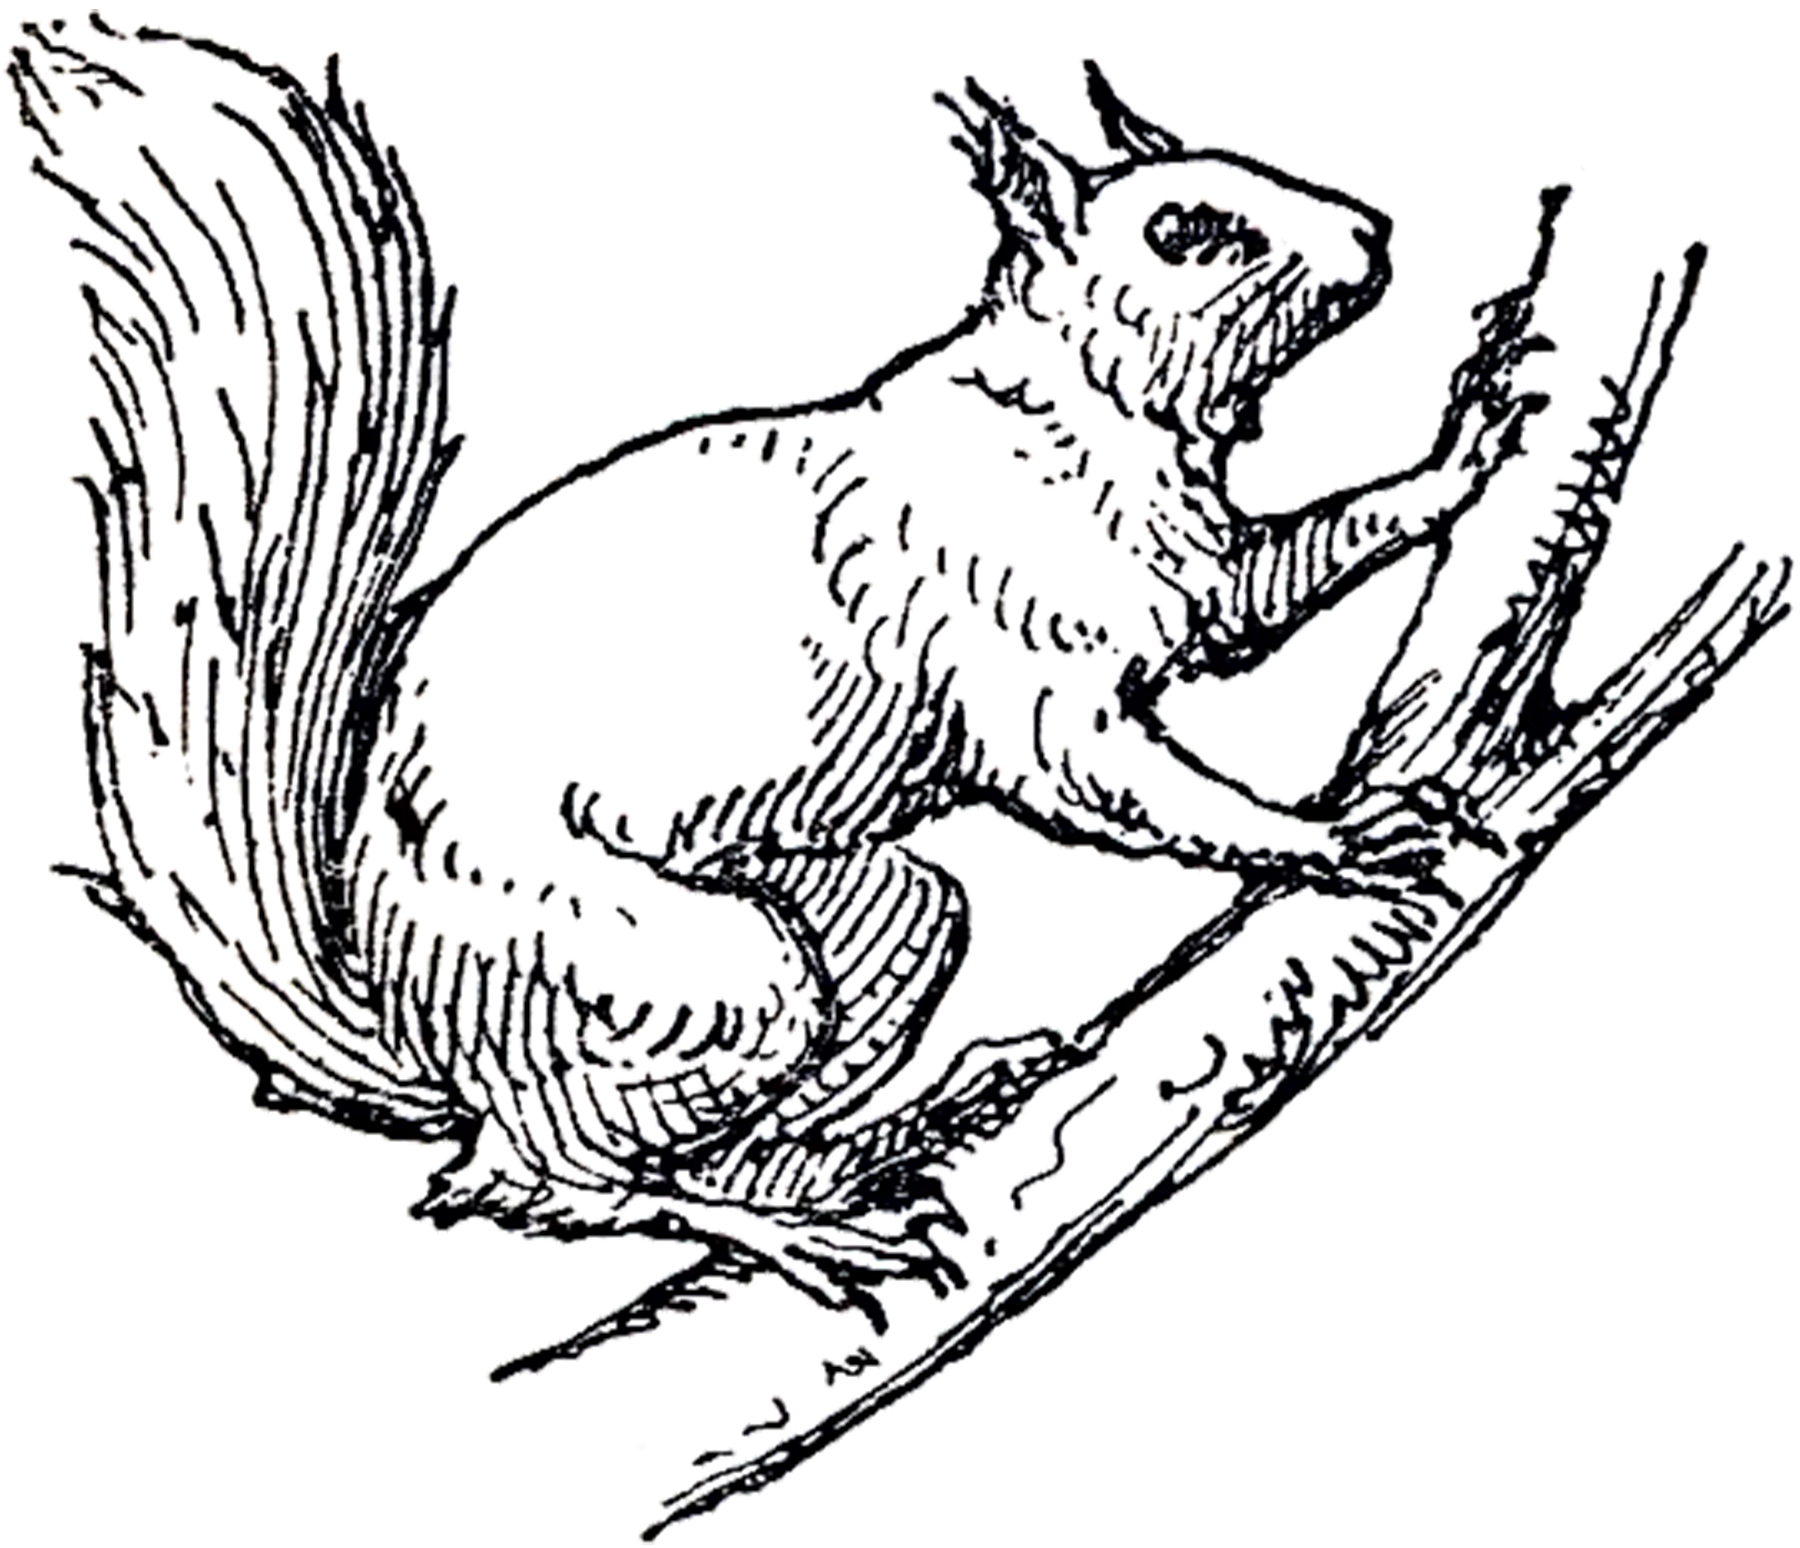 Acorn clipart gray squirrel. Cute with png cartoon